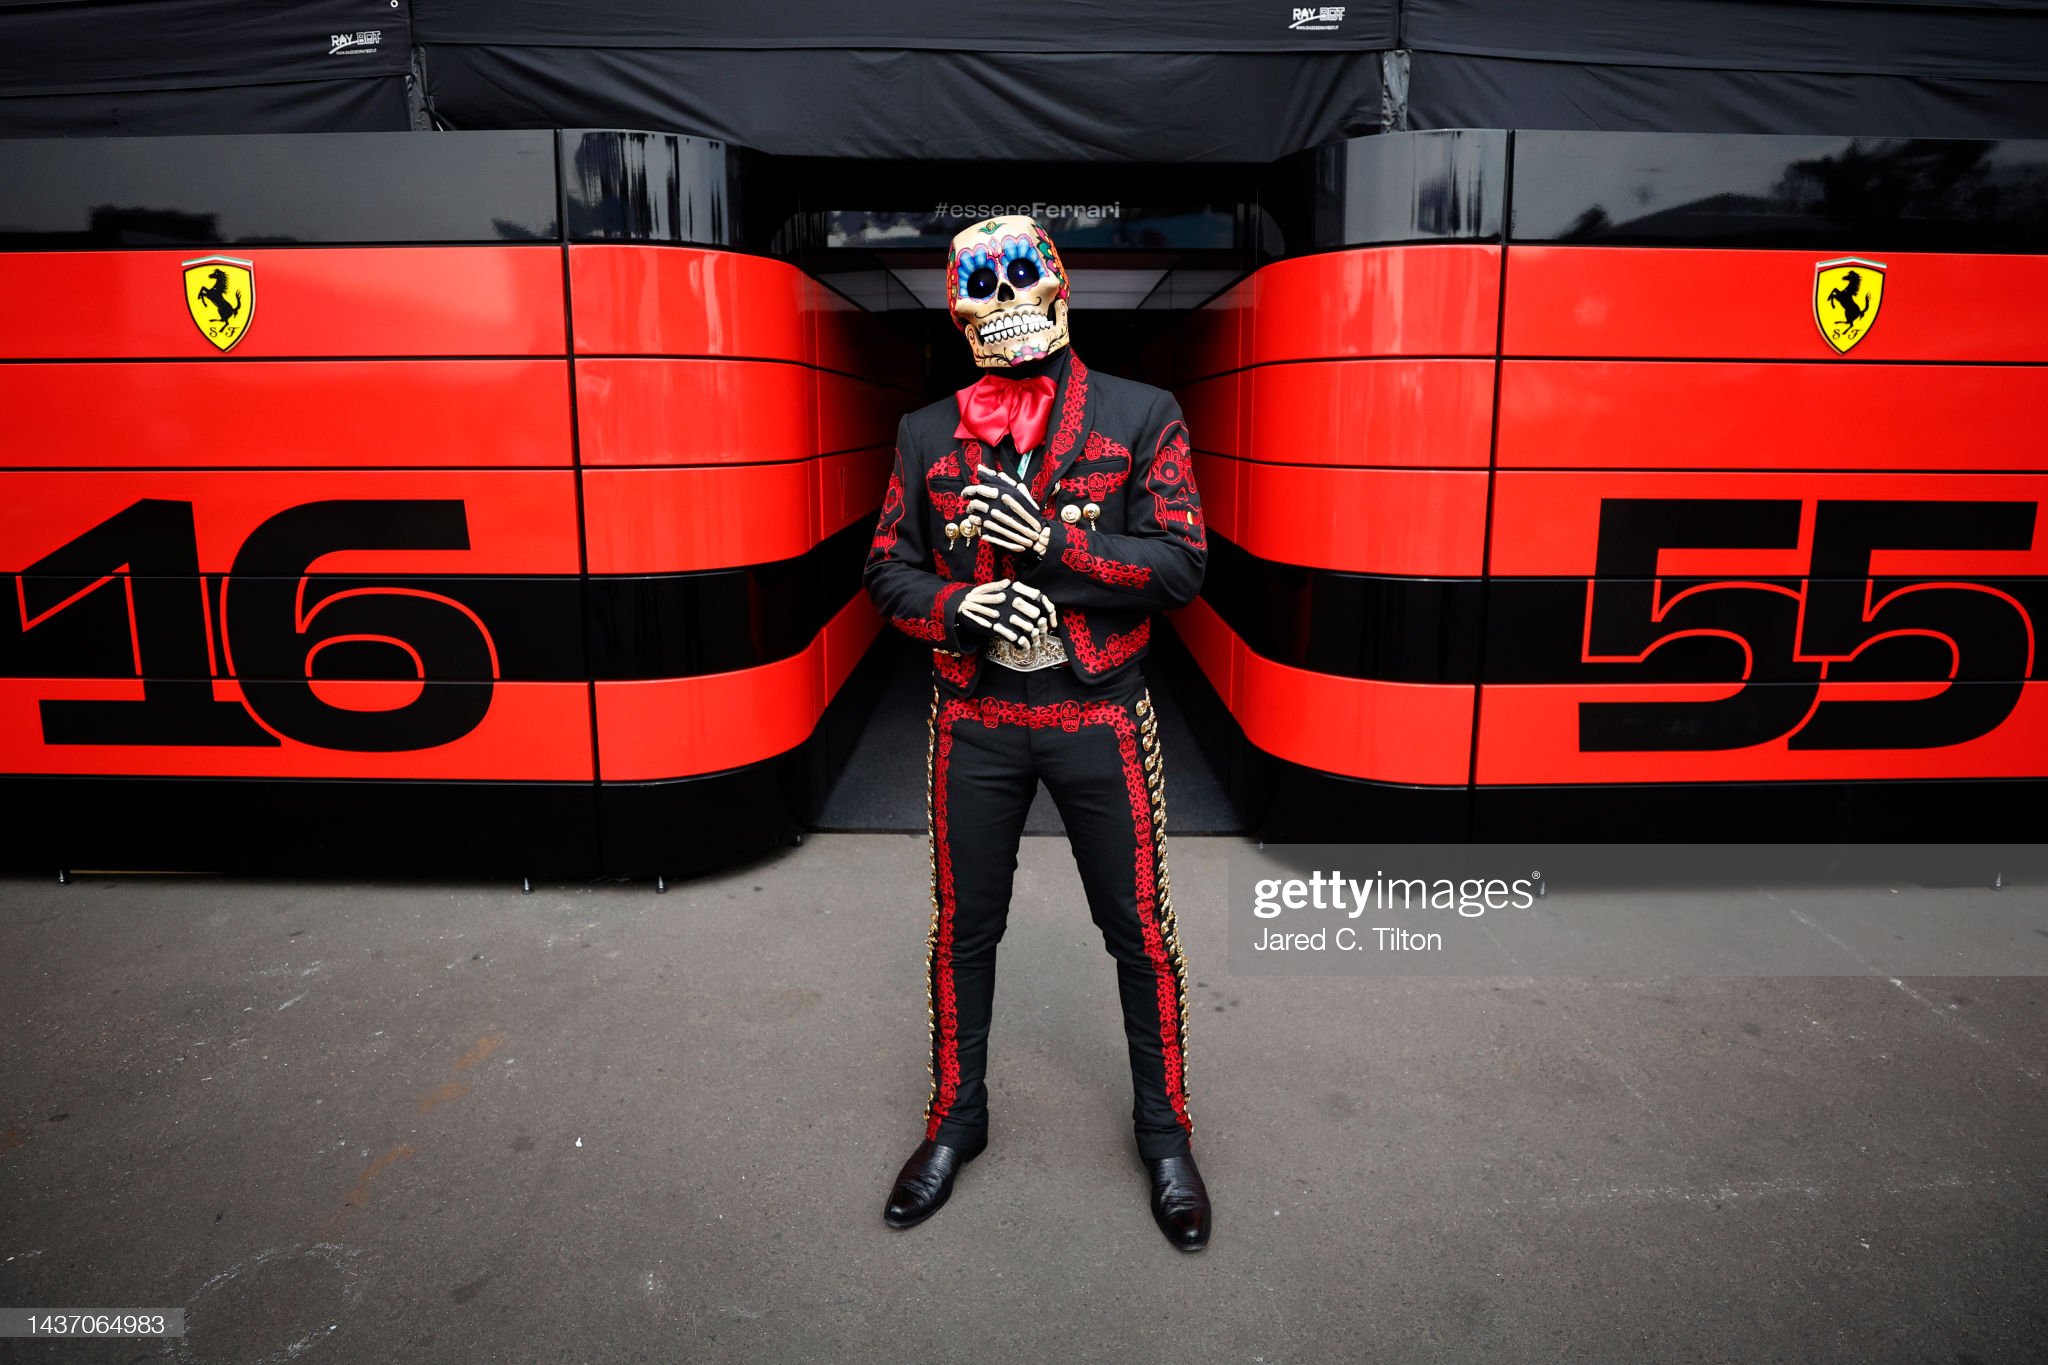 A Day of the Dead performer poses for a photo outside the Ferrari garage.